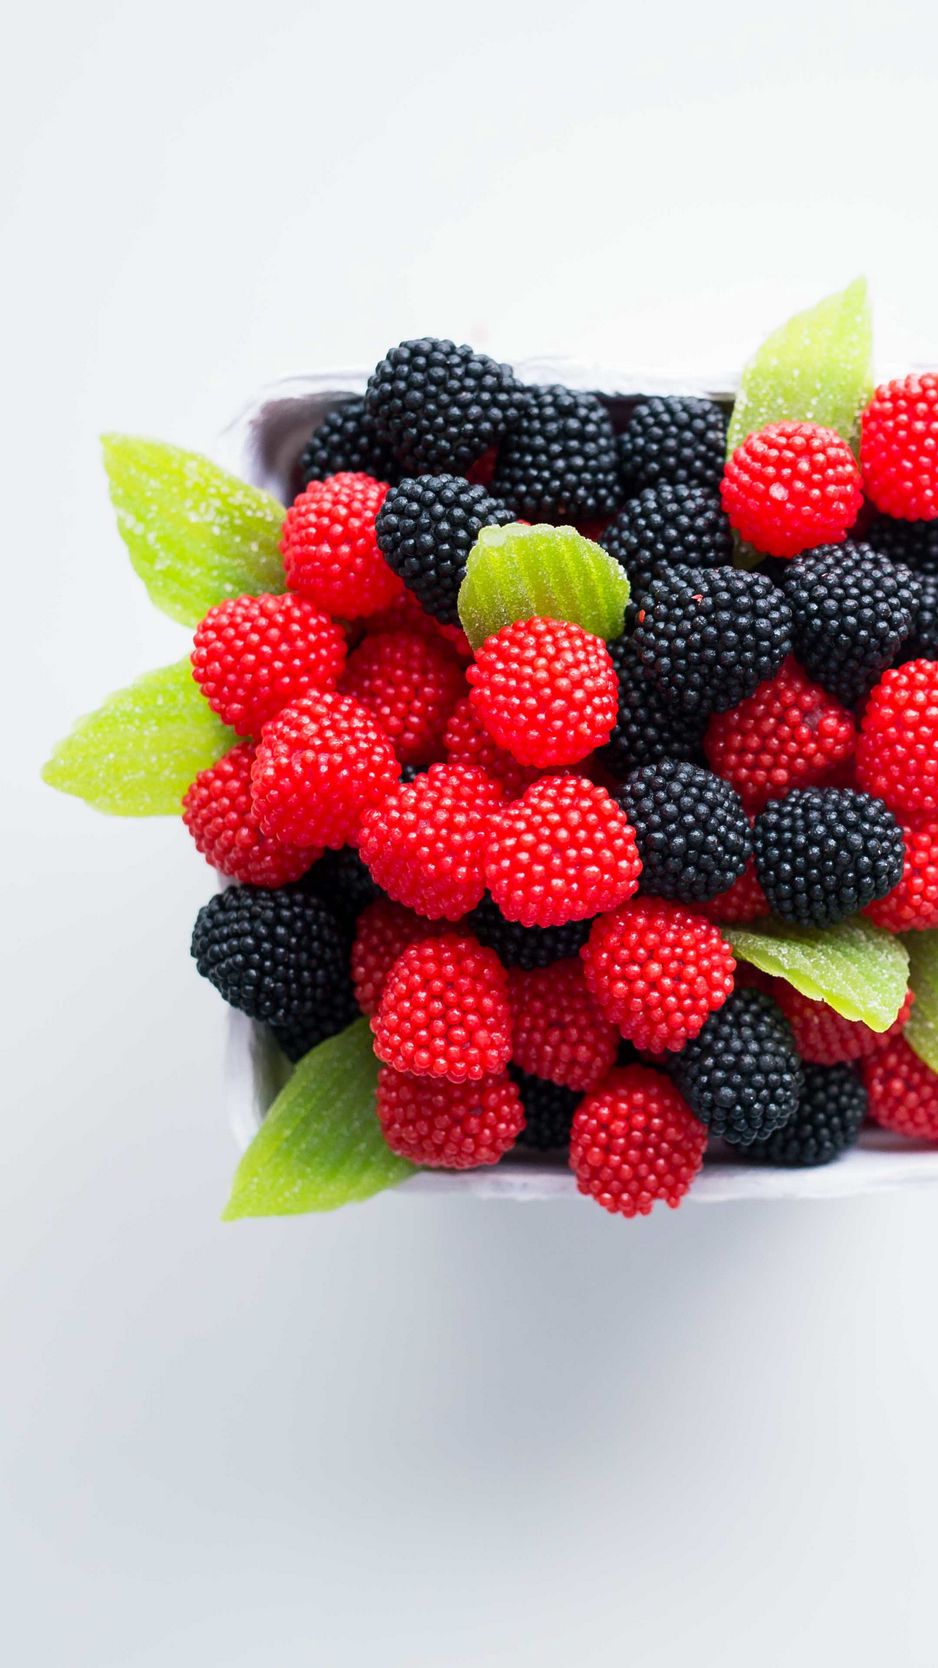 500 Blackberry Pictures HD  Download Free Images on Unsplash